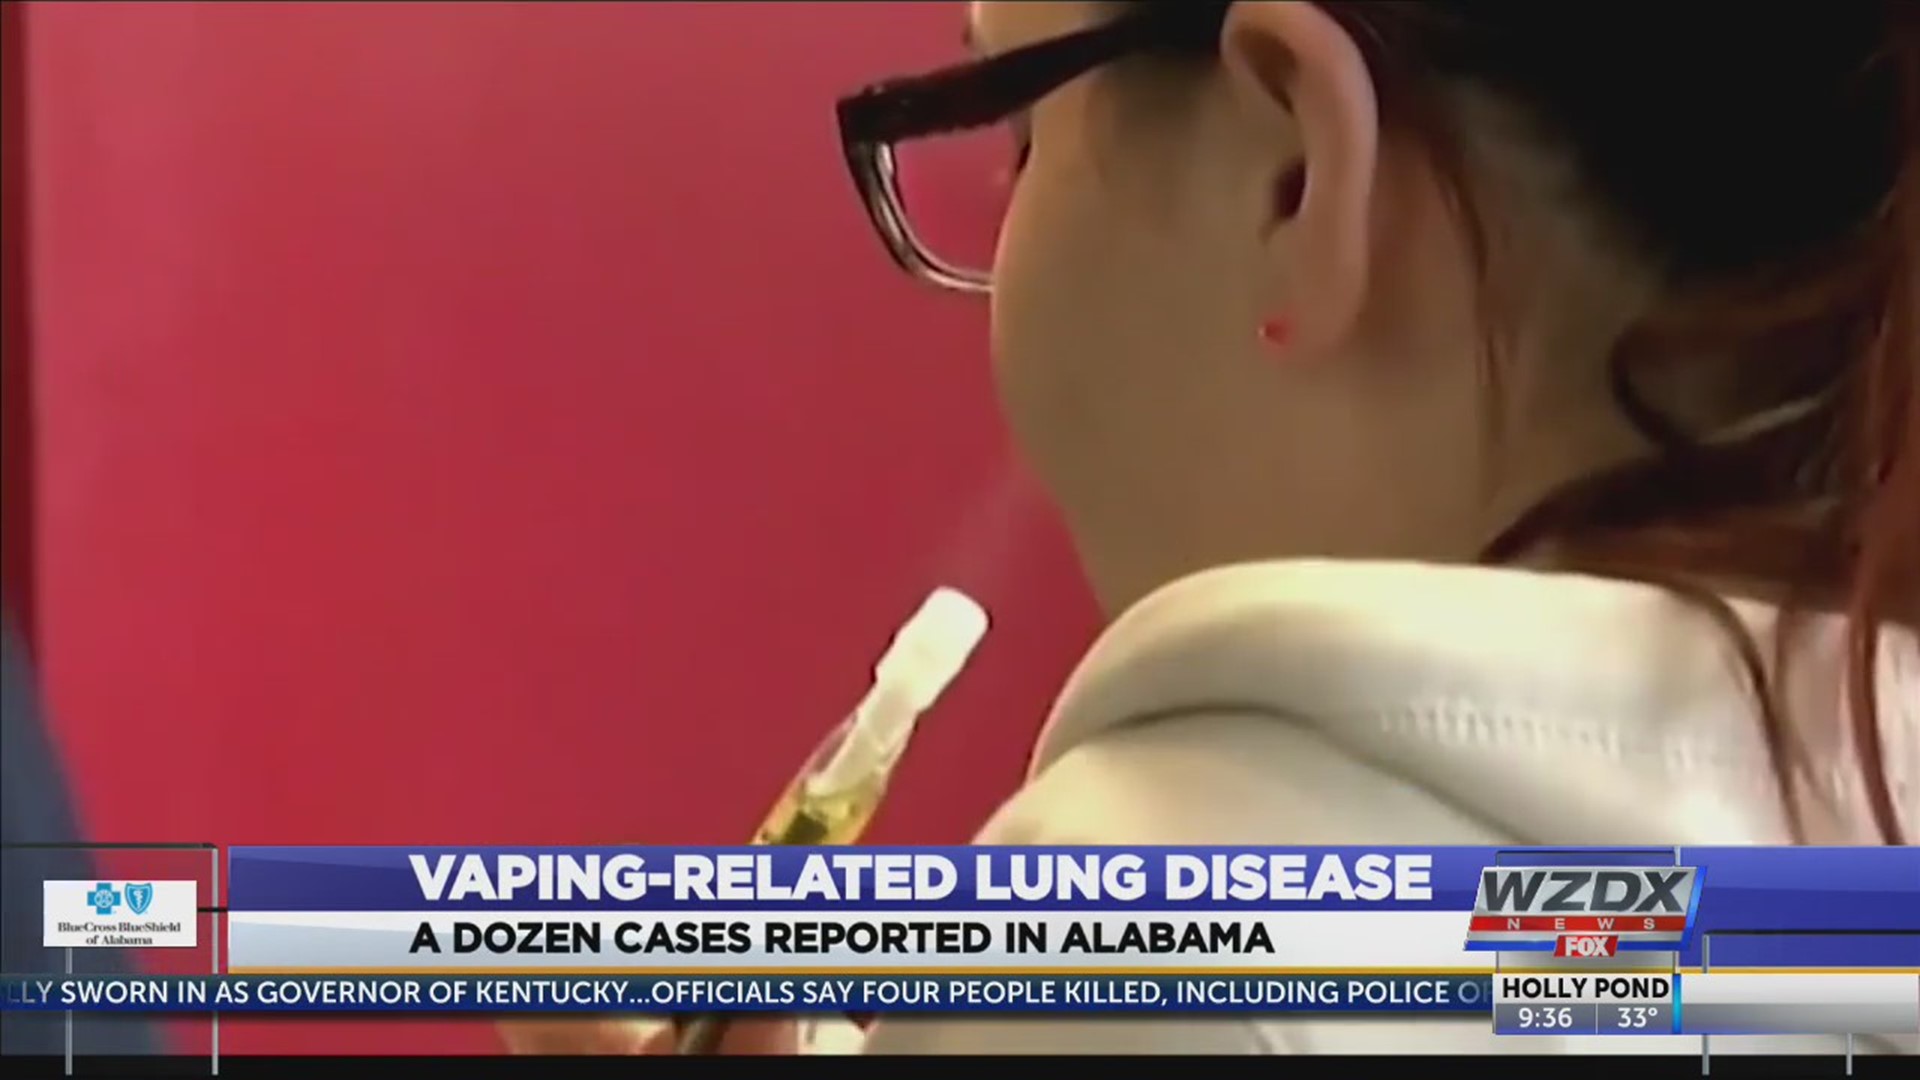 According to the Alabama Dept. of Public Health, as of December 4, 2019, the Alabama Department of Public Health (ADPH) has 12 cases of lung disease associated with e-cigarette product use, or vaping. The 12 cases will be included in the CDC national counts.